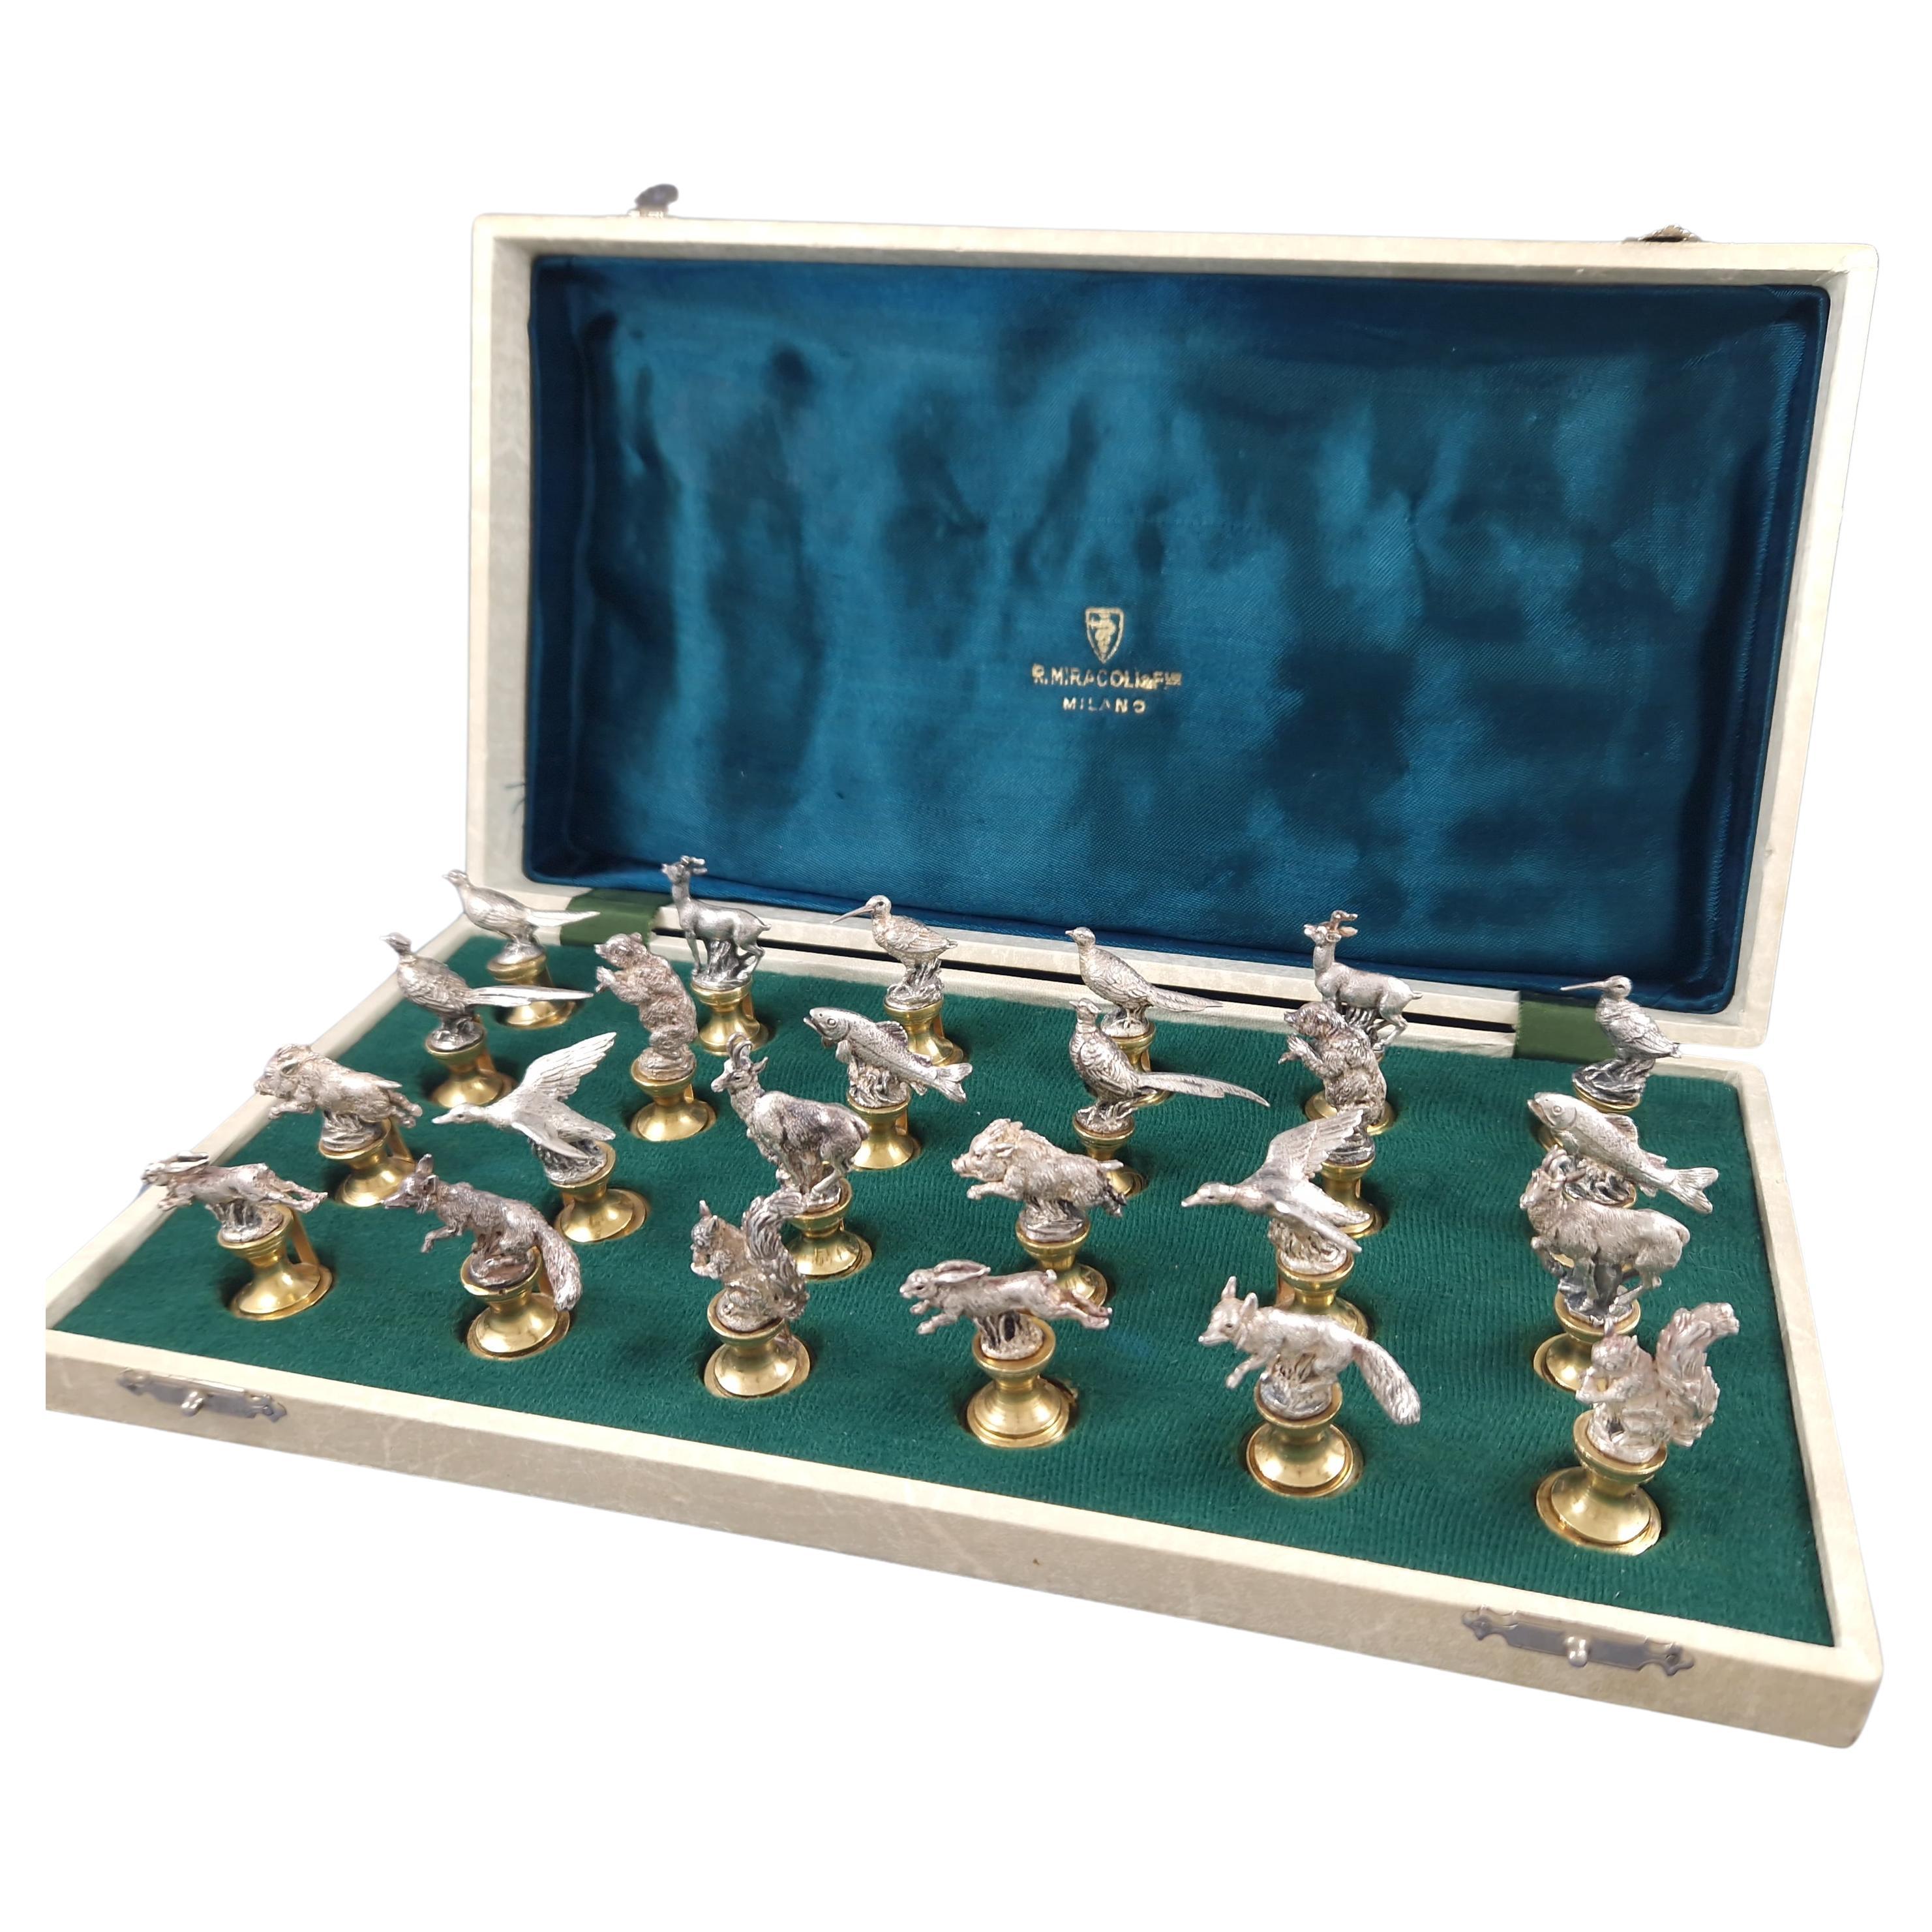 24 Animal Place Card Or Menu Holders In Sterling Silver & Gilt Hunting Theme